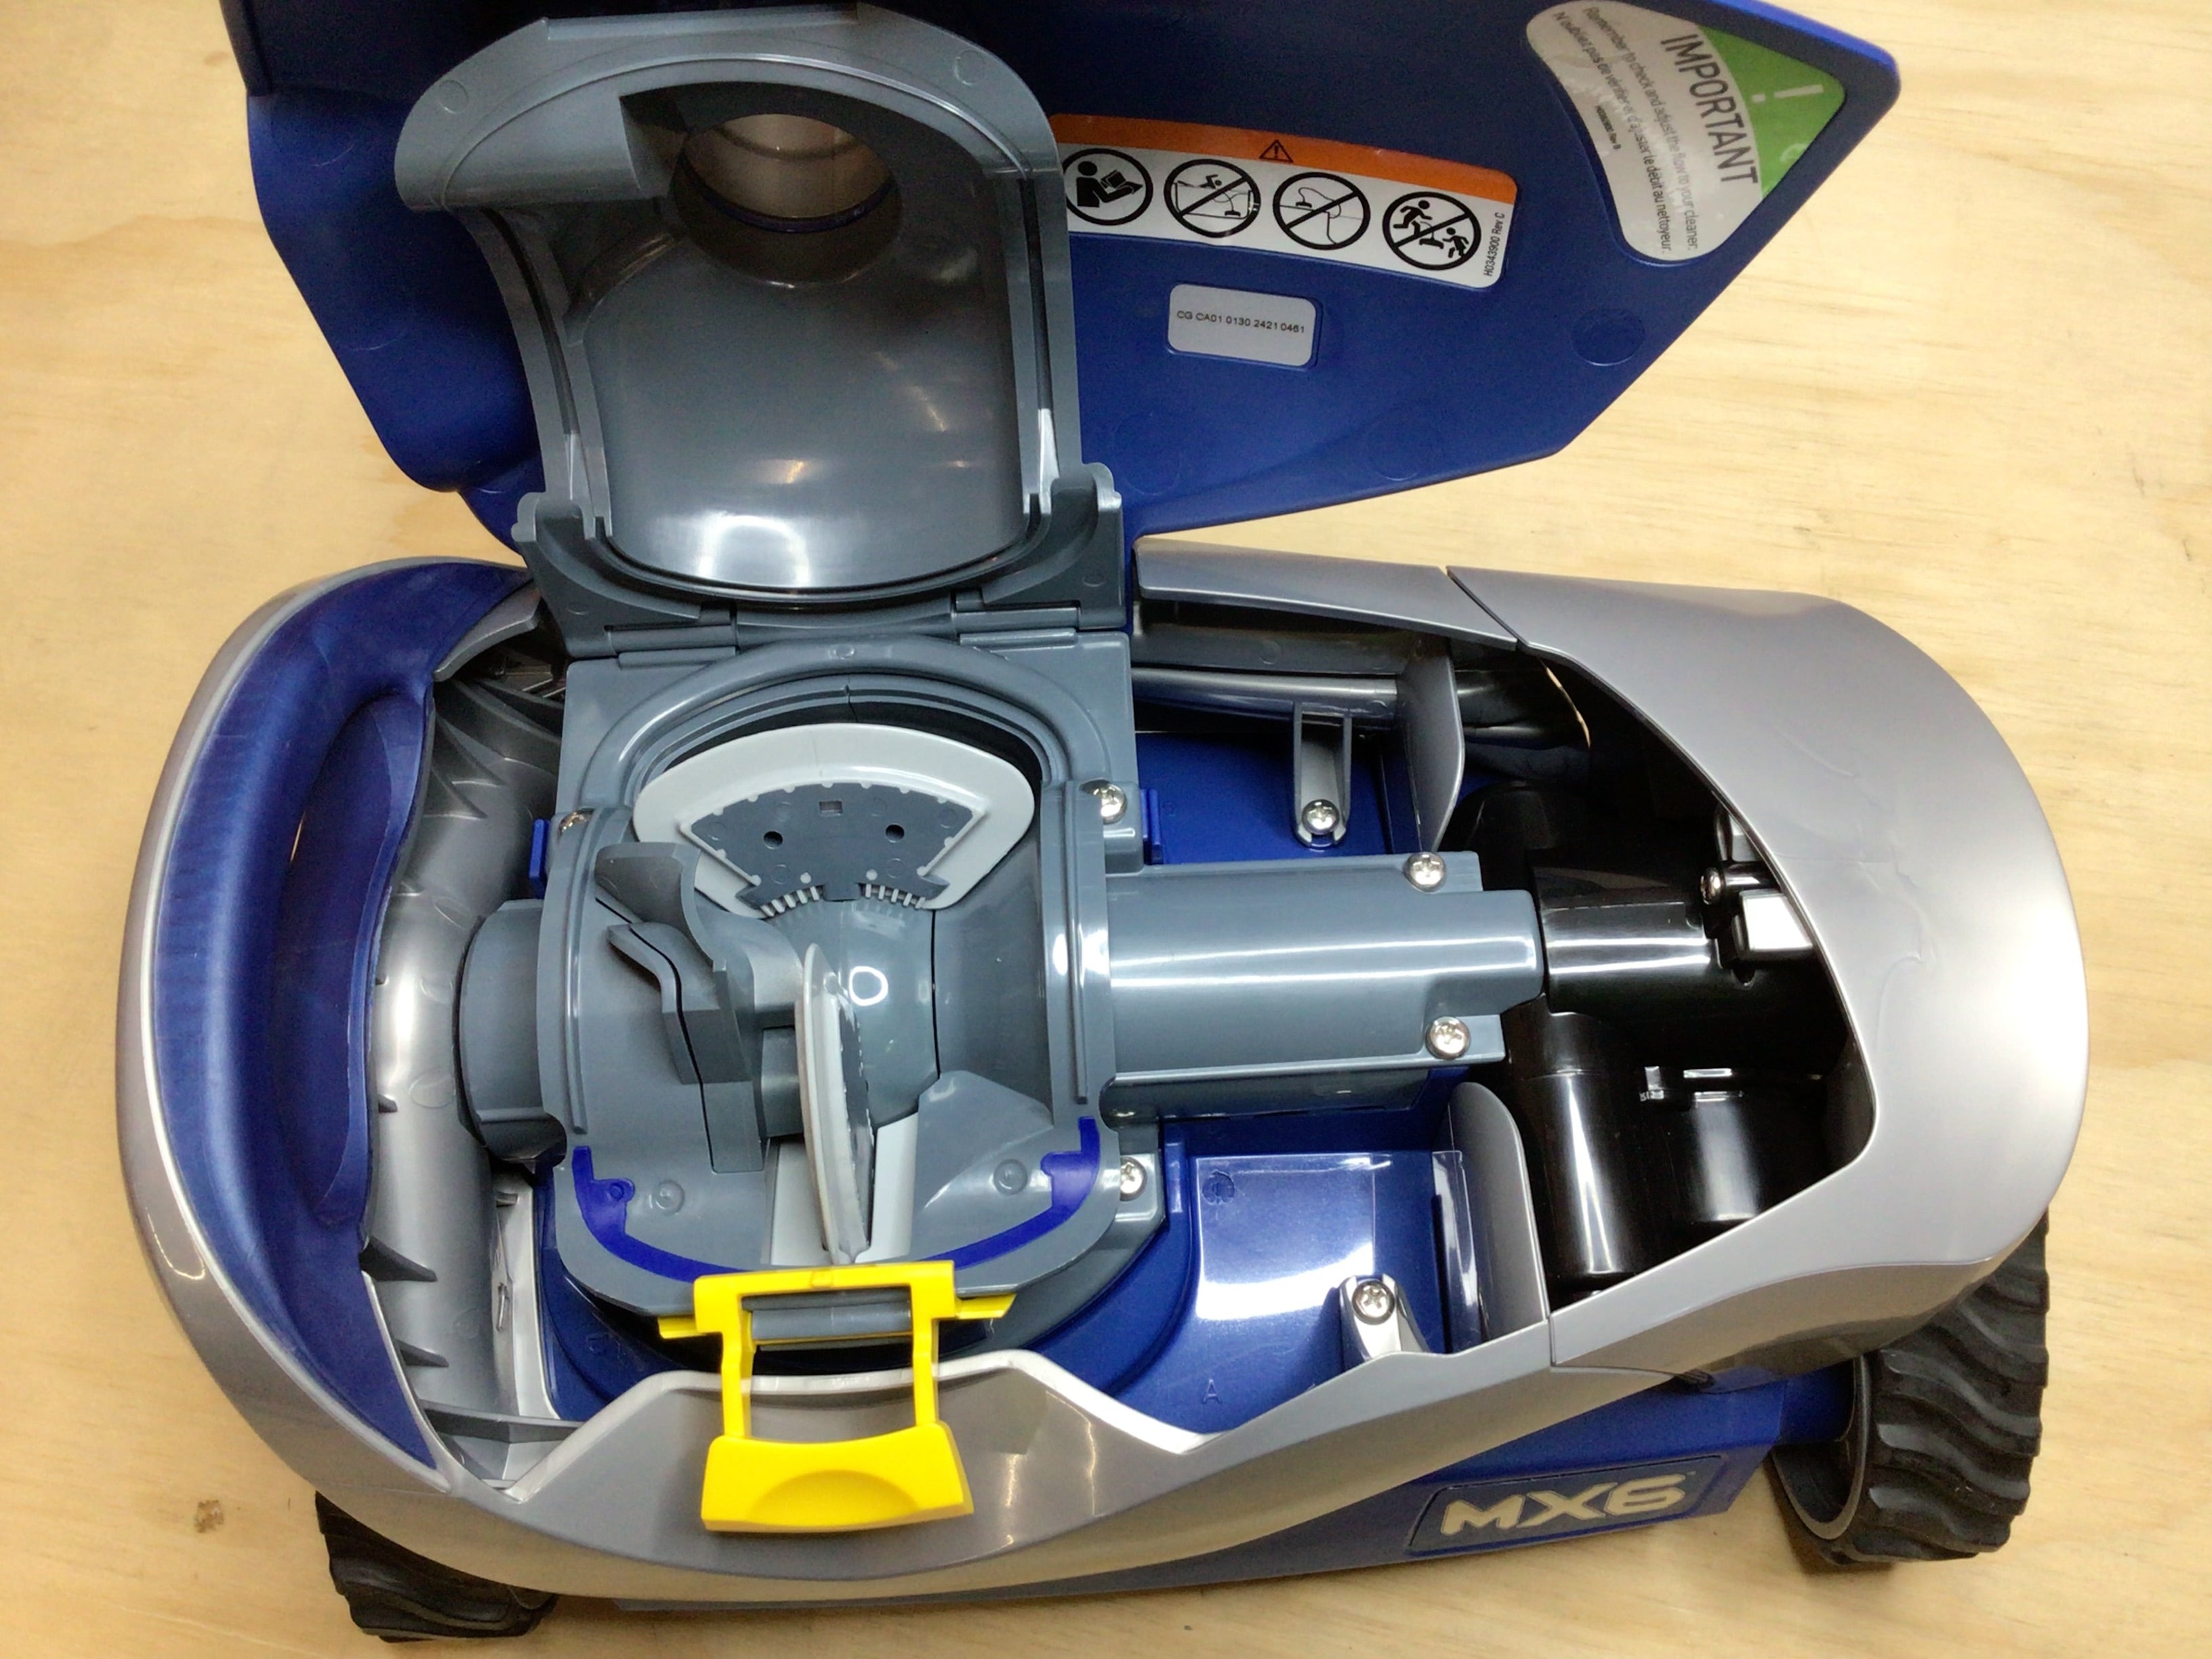 Zodiac MX6 Automatic Suction-Side Pool Cleaner Vacuum for Pools *OPEN BOX* (8101183357166)